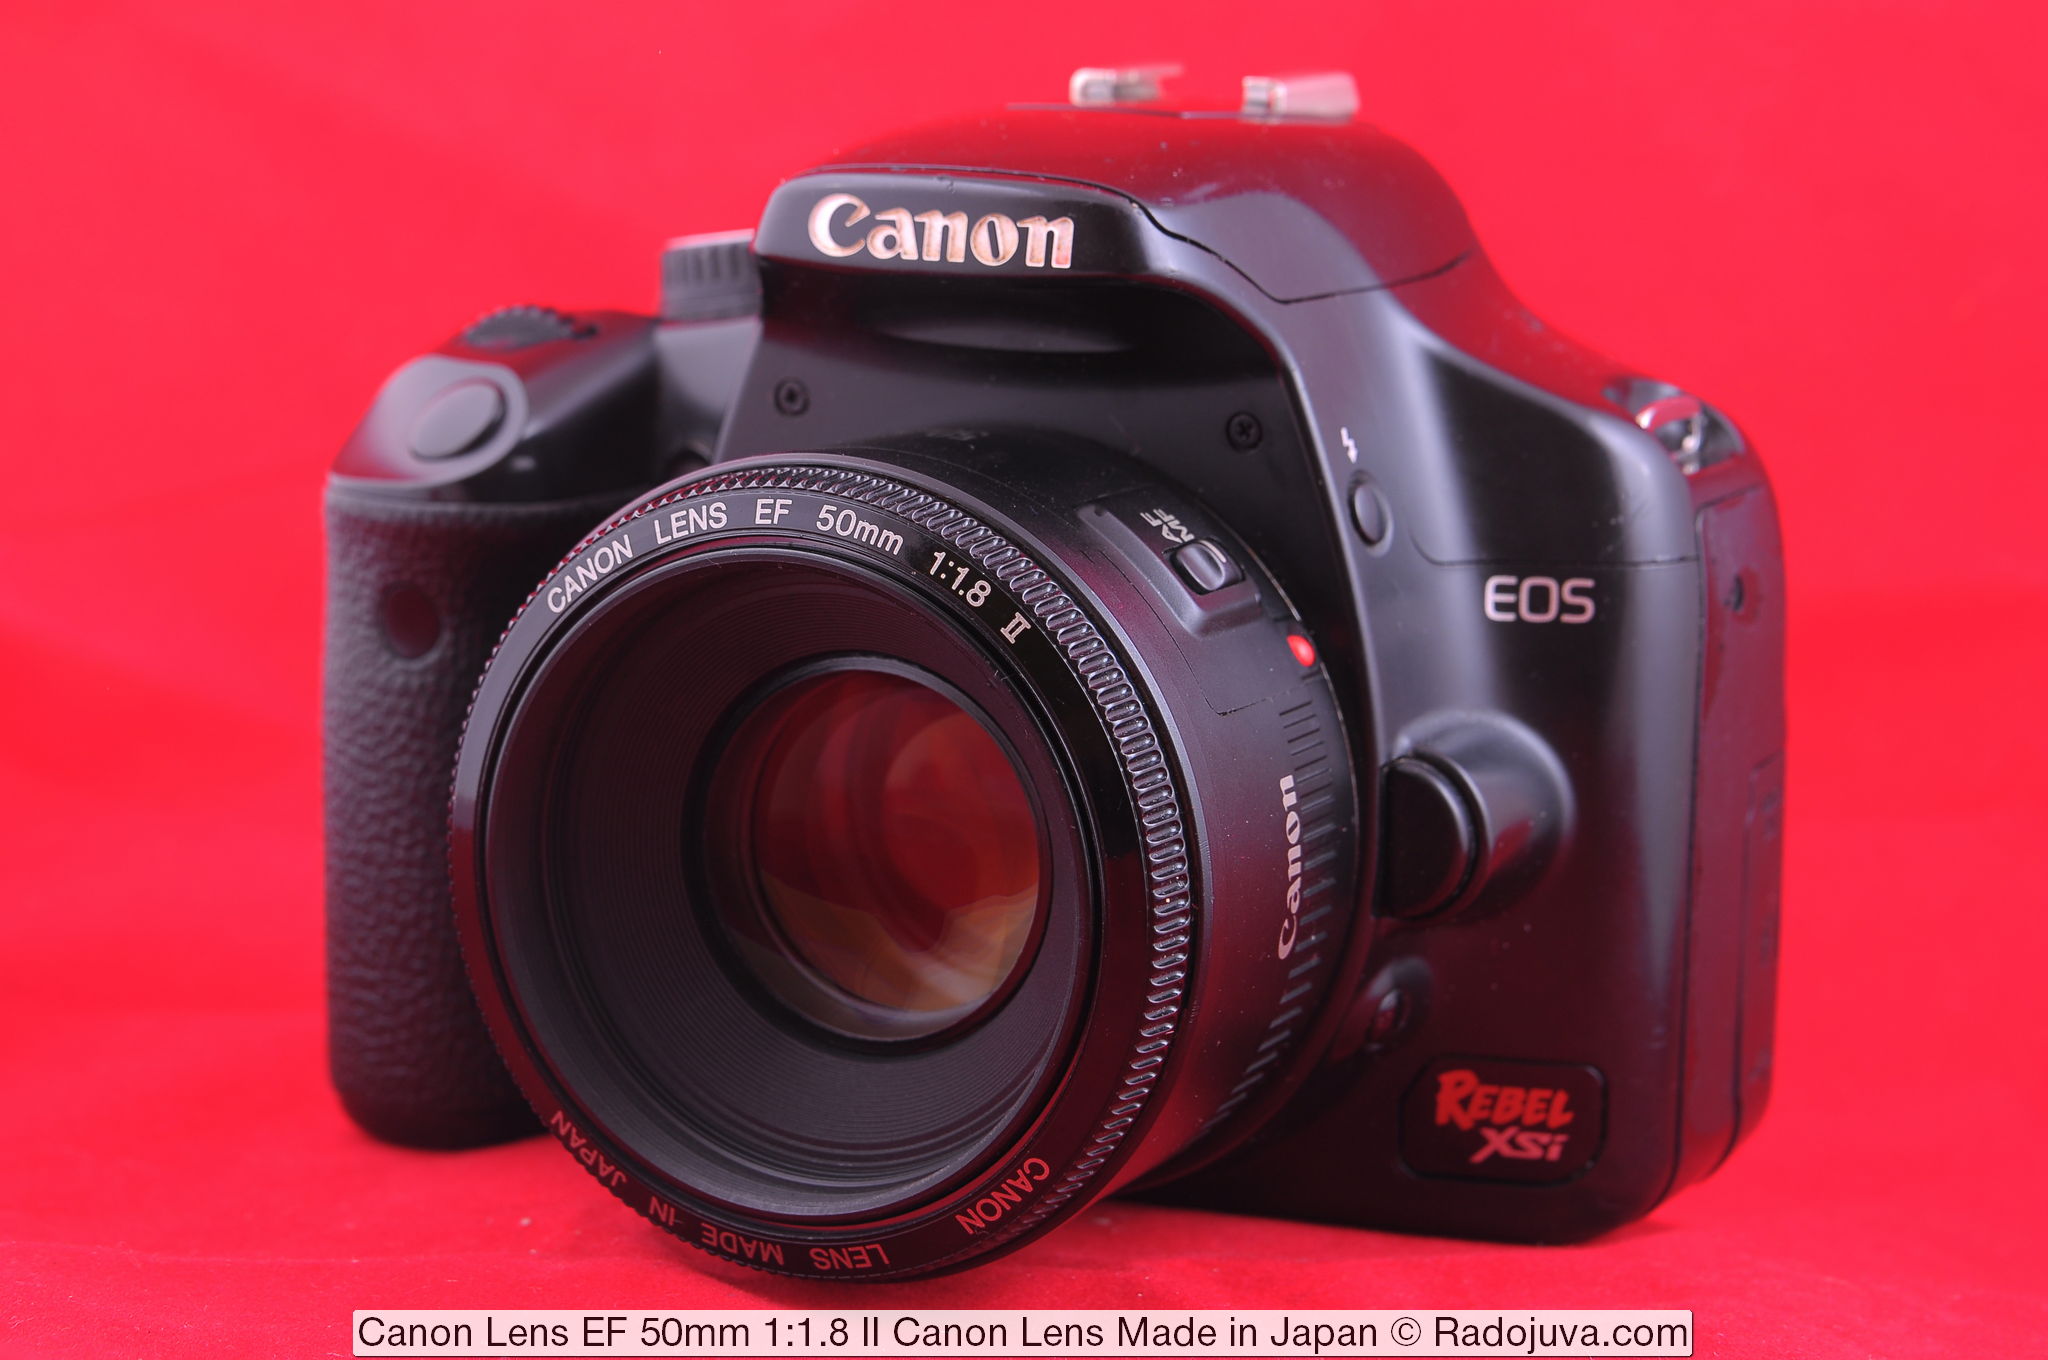 Canon Lens EF 50mm 1: 1.8 II, 'Canon Lens Made in Japan' Version